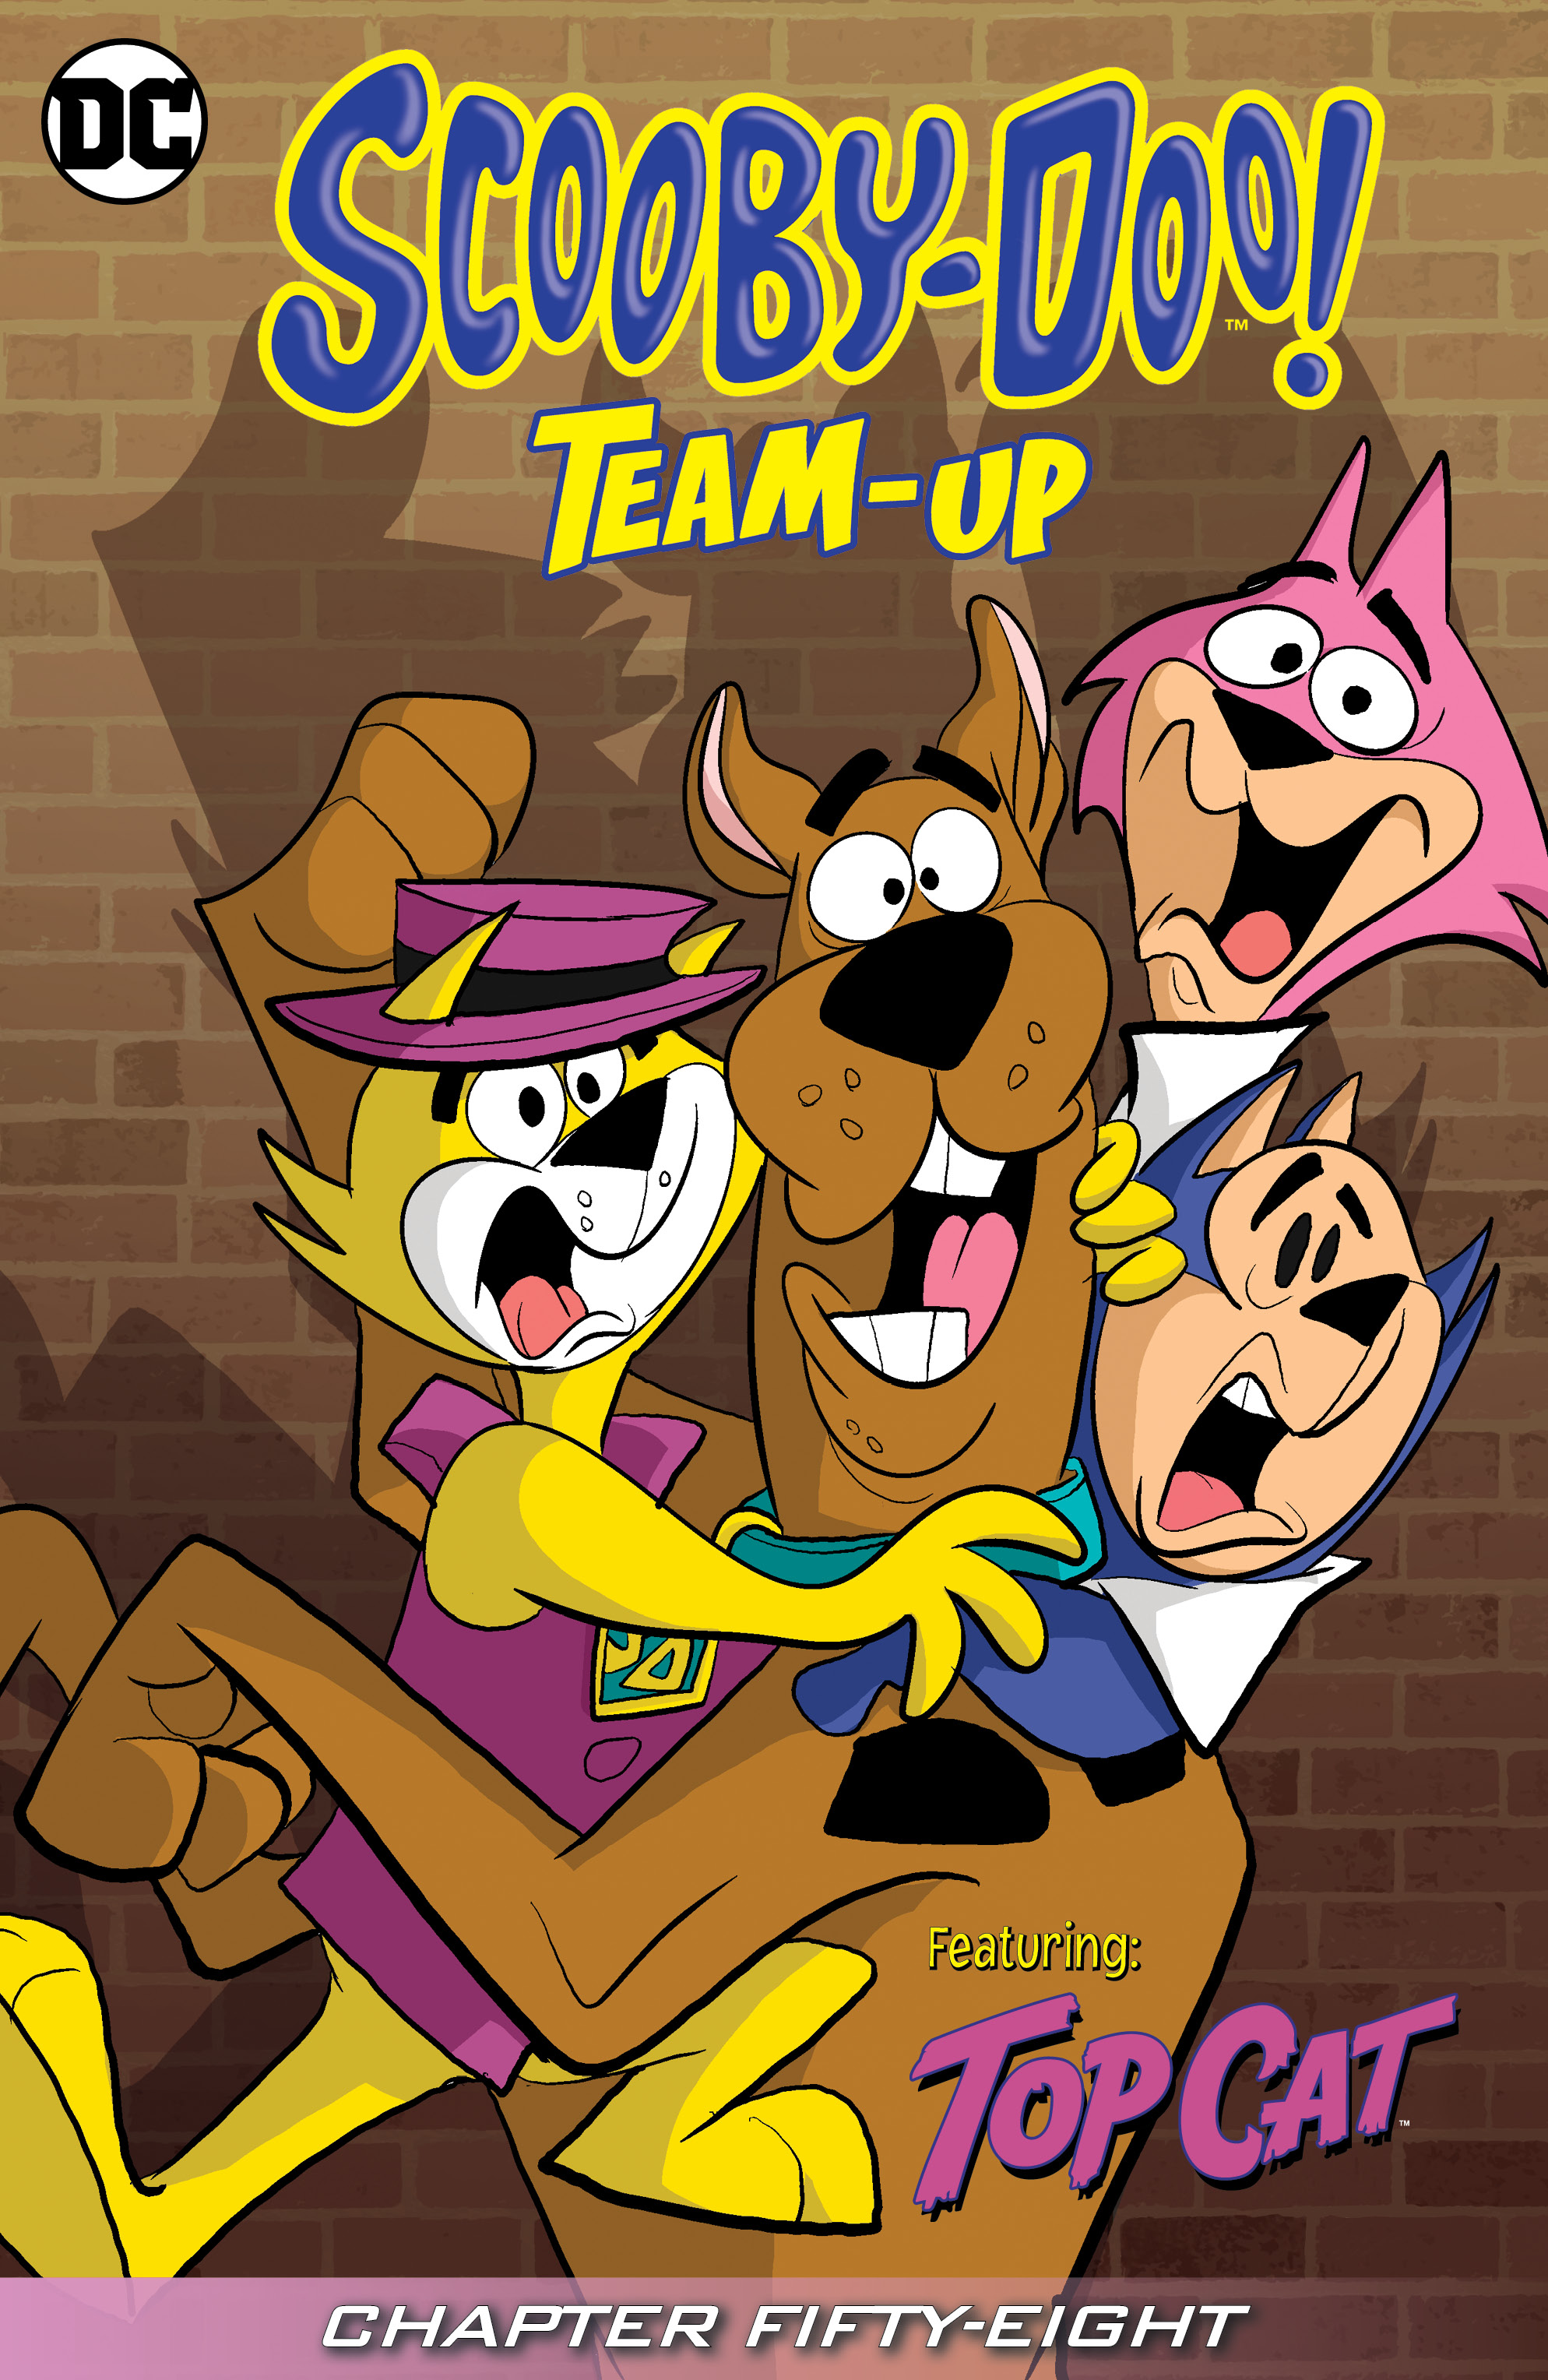 Scooby-Doo Team-Up #58 preview images